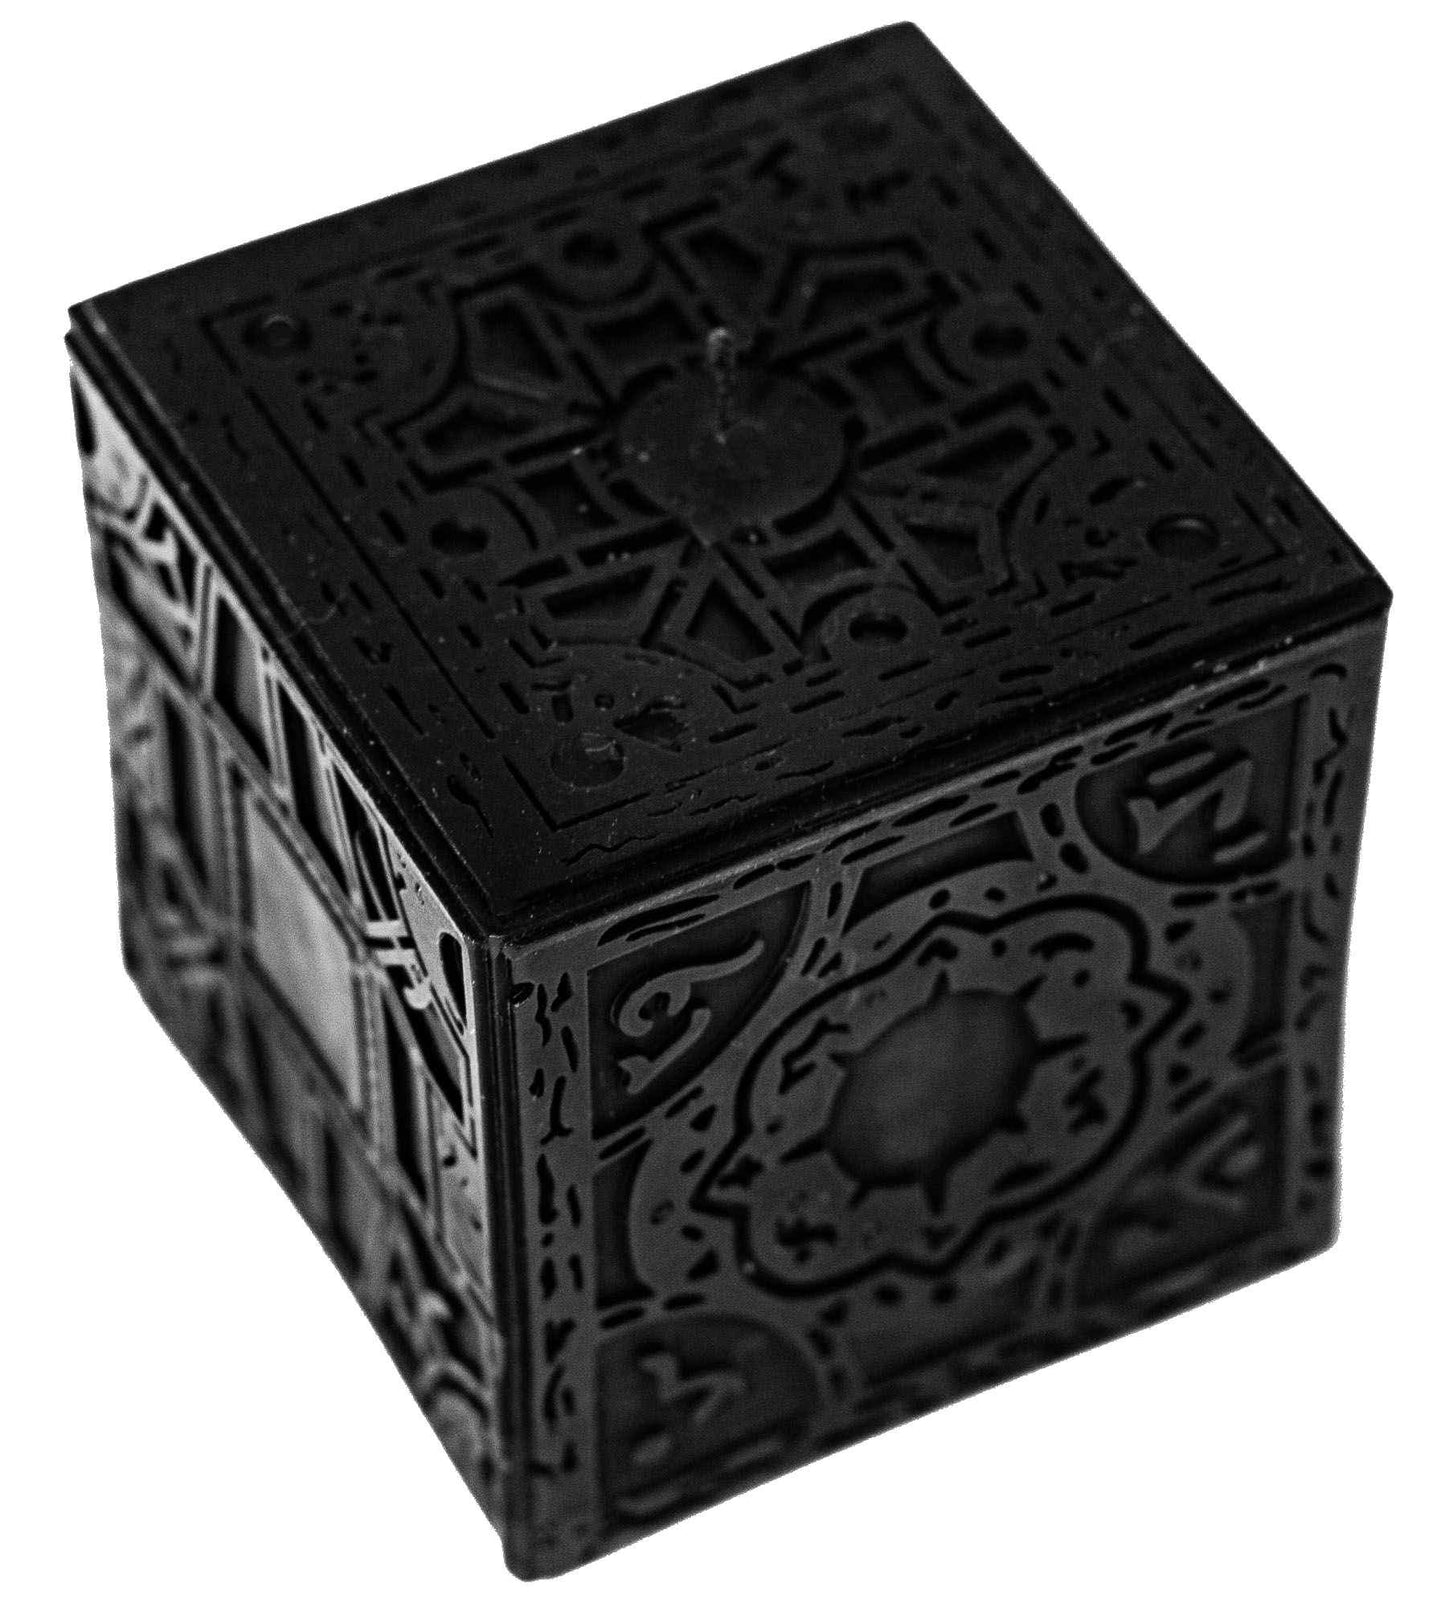 The Cube Candle